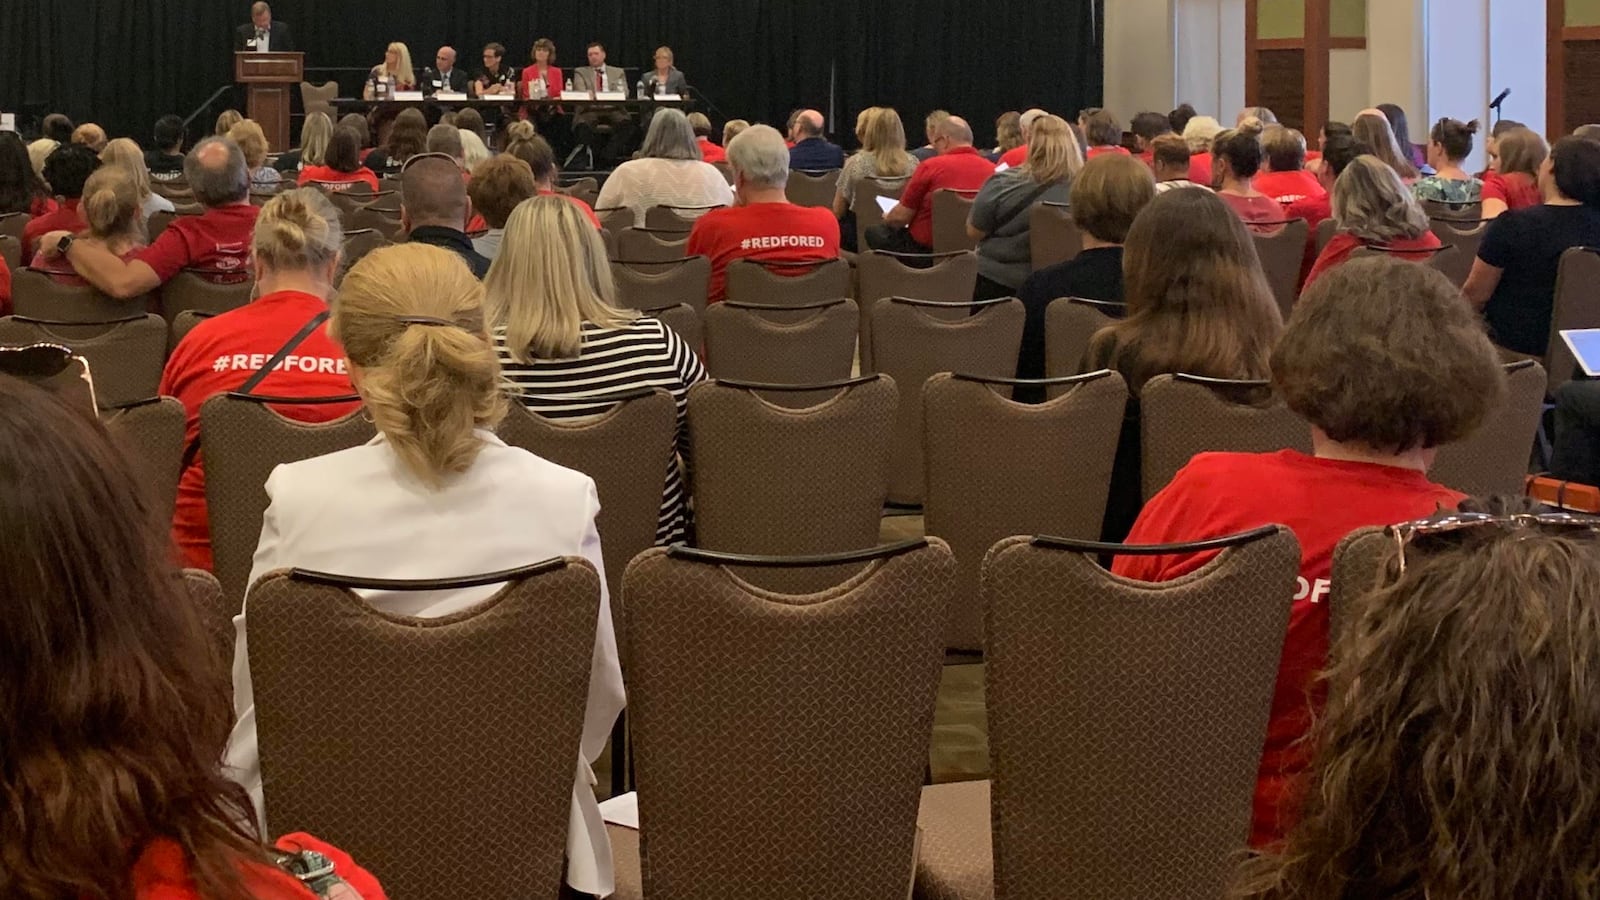 About 100 people showed up to the first public input session of Gov. Eric Holcomb's teacher pay commission Aug. 19 at the Ivy Tech Culinary and Conference Center in Indianapolis. Educators offered suggestions for how to raise teacher pay in Indiana.